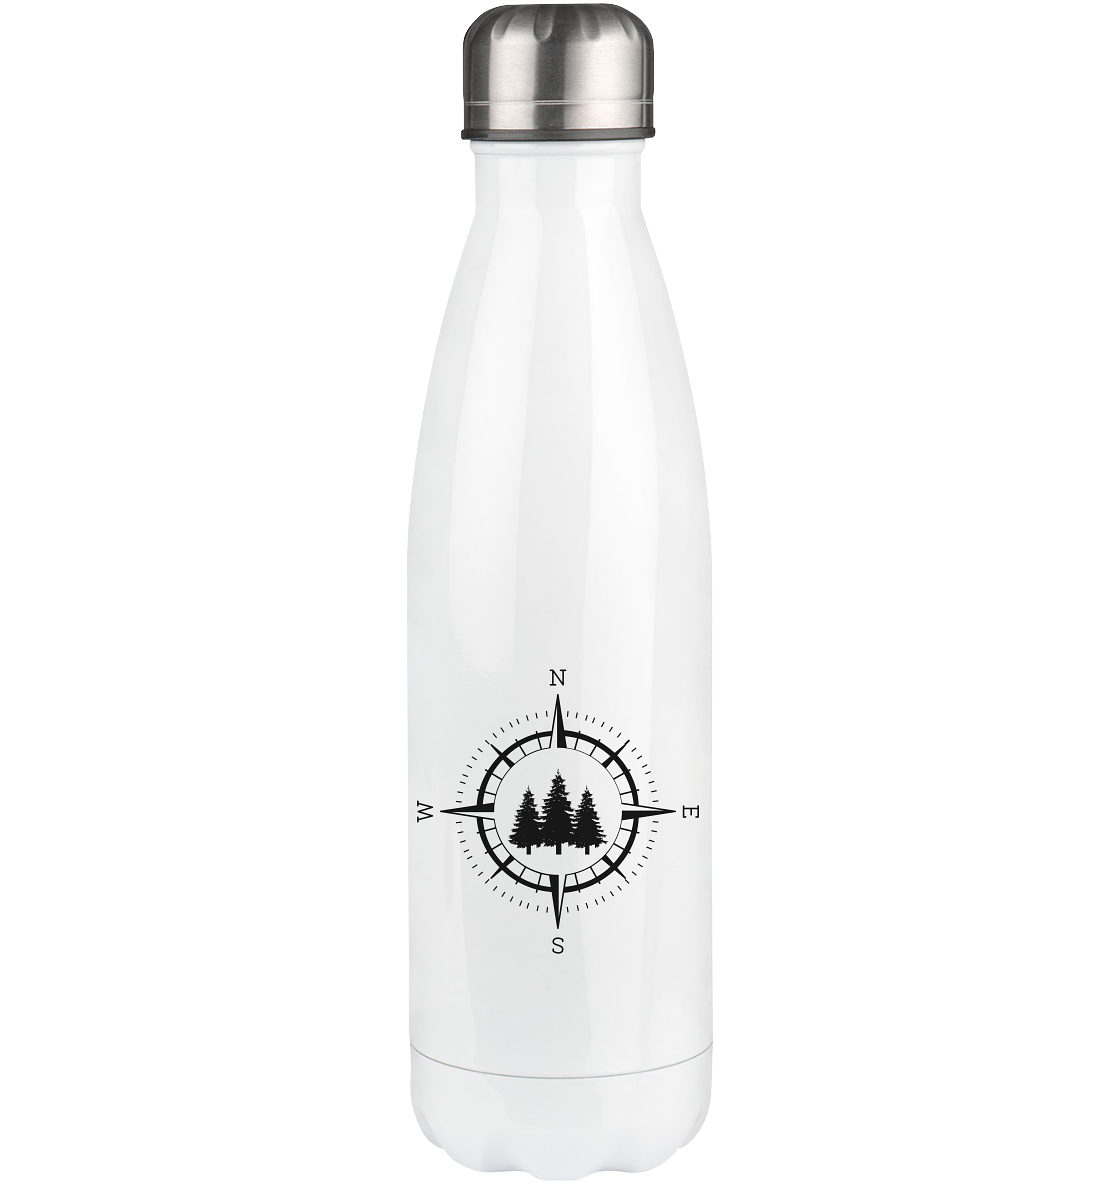 Compass and Trees - Edelstahl Thermosflasche camping UONP 500ml